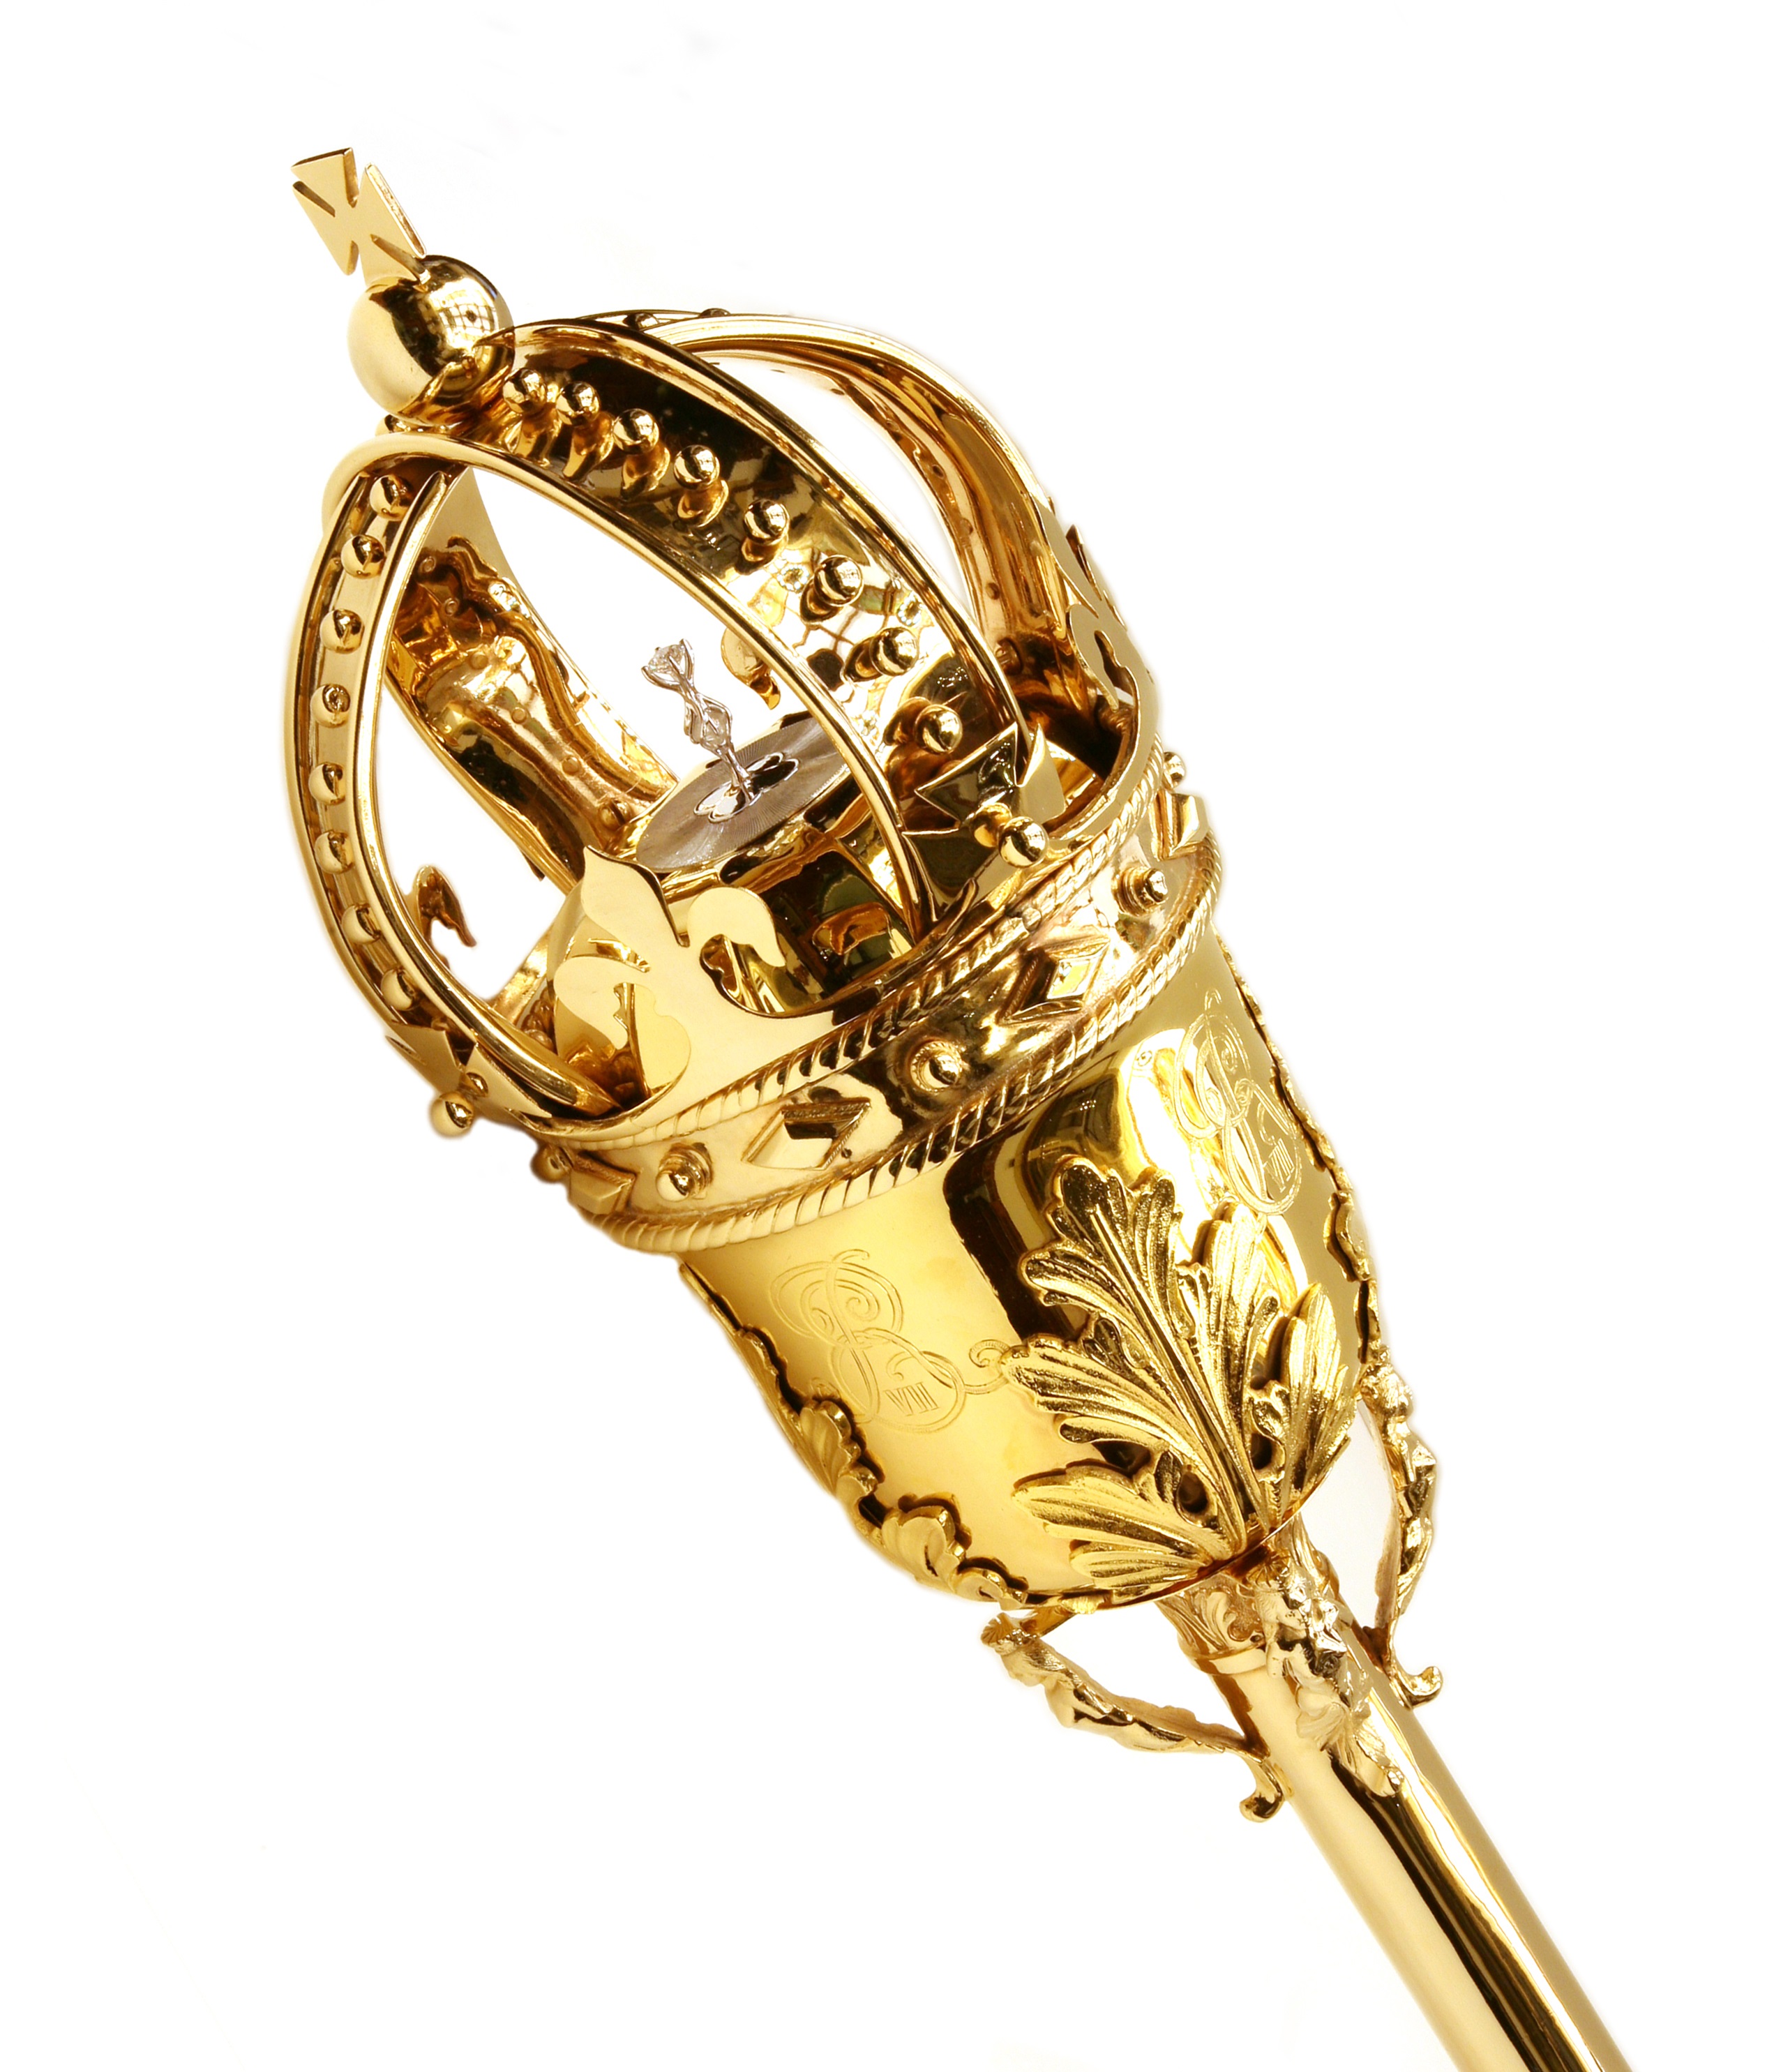 Picture of Ontario's Mace